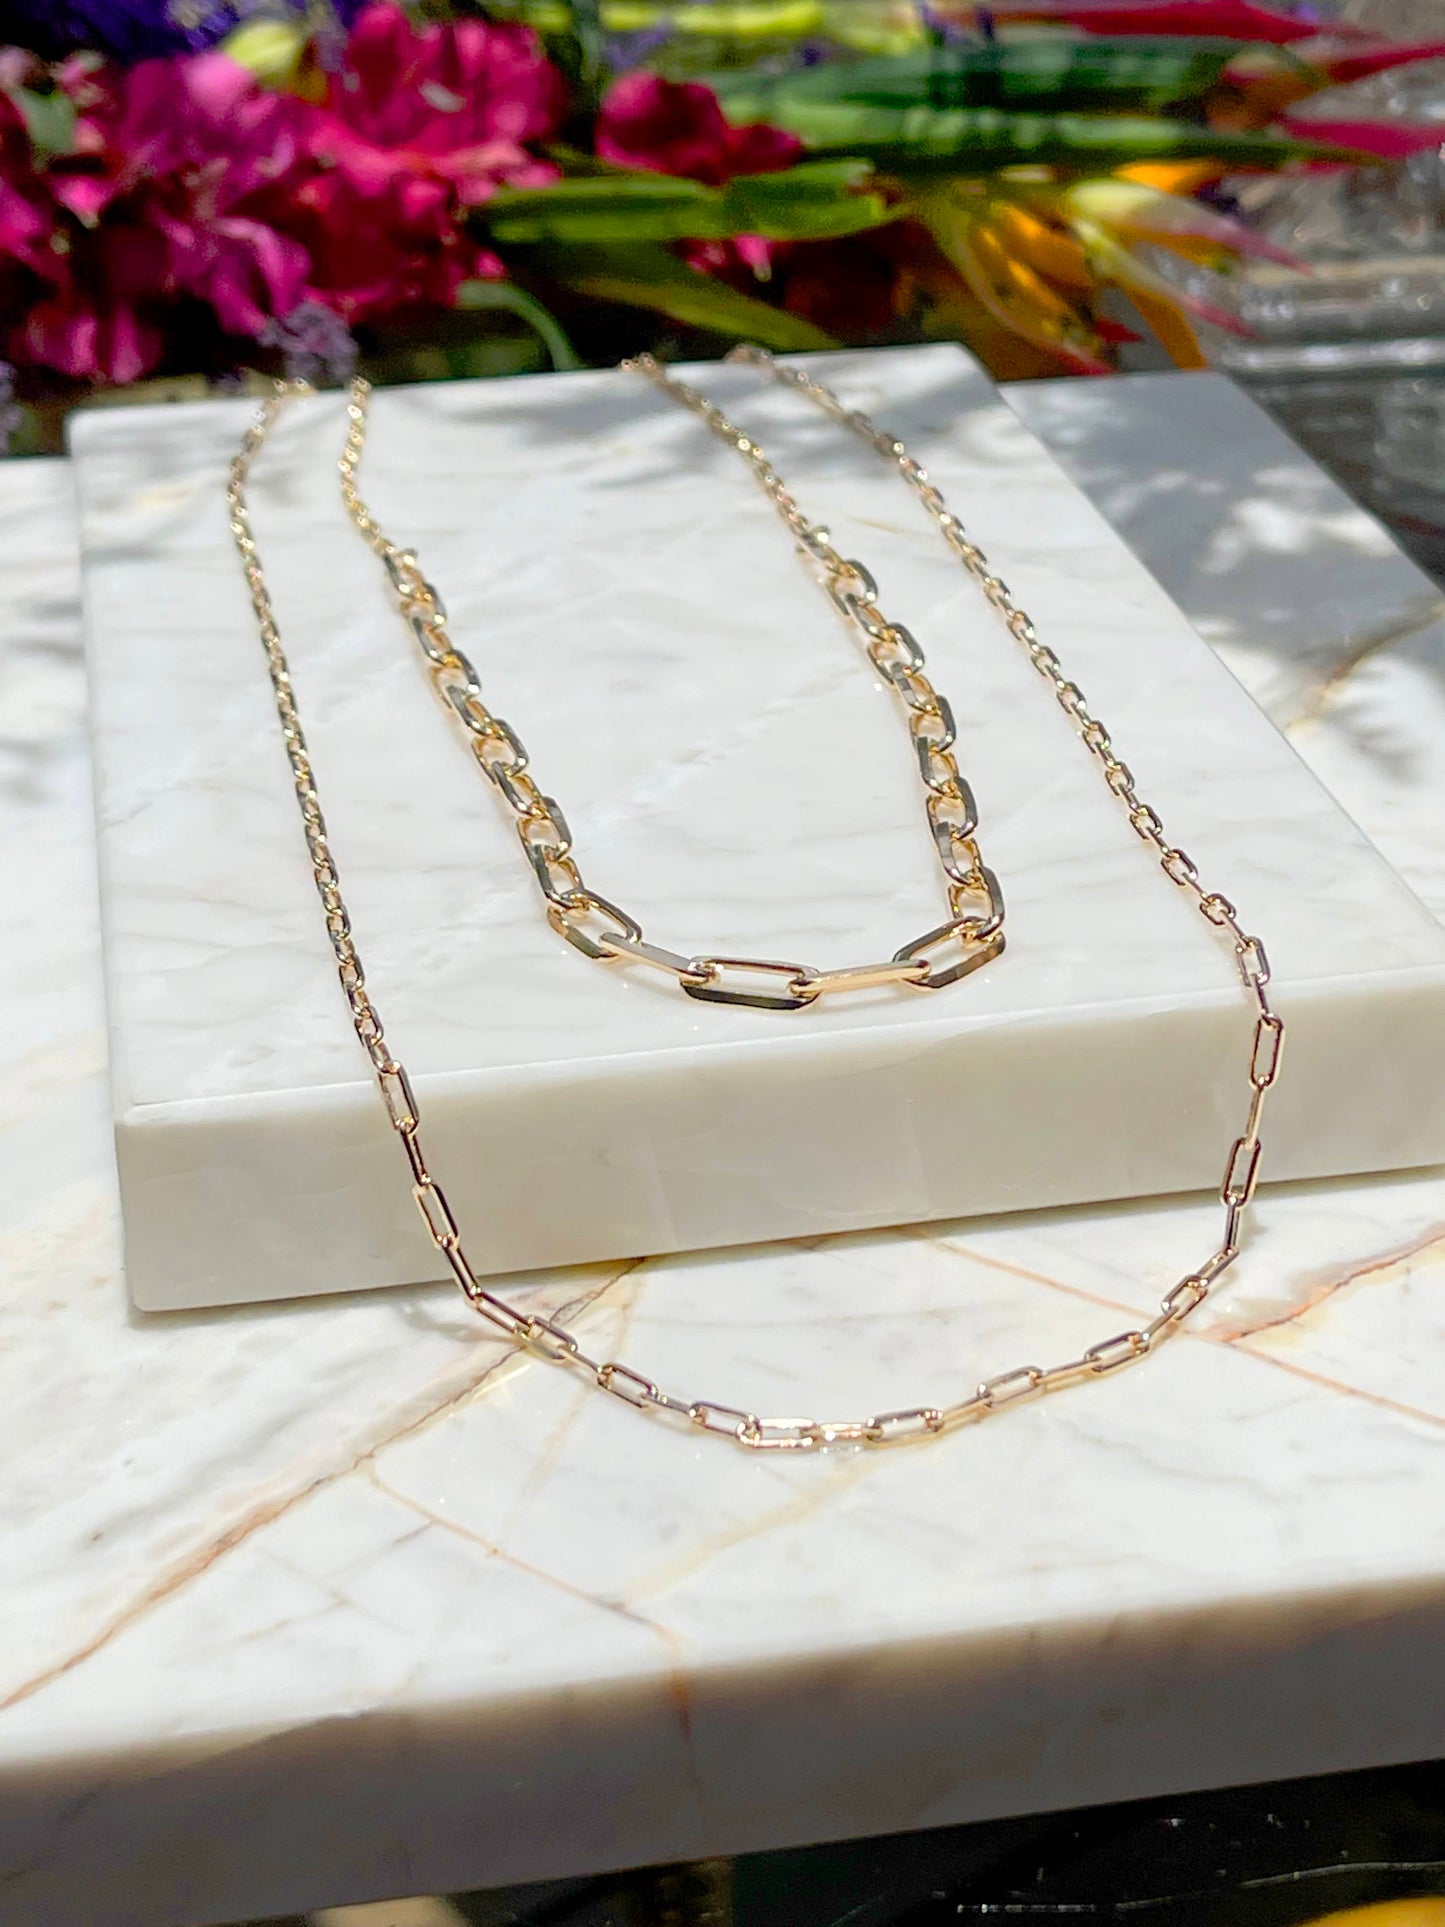 18K gold plated chain necklace with small rectangular links